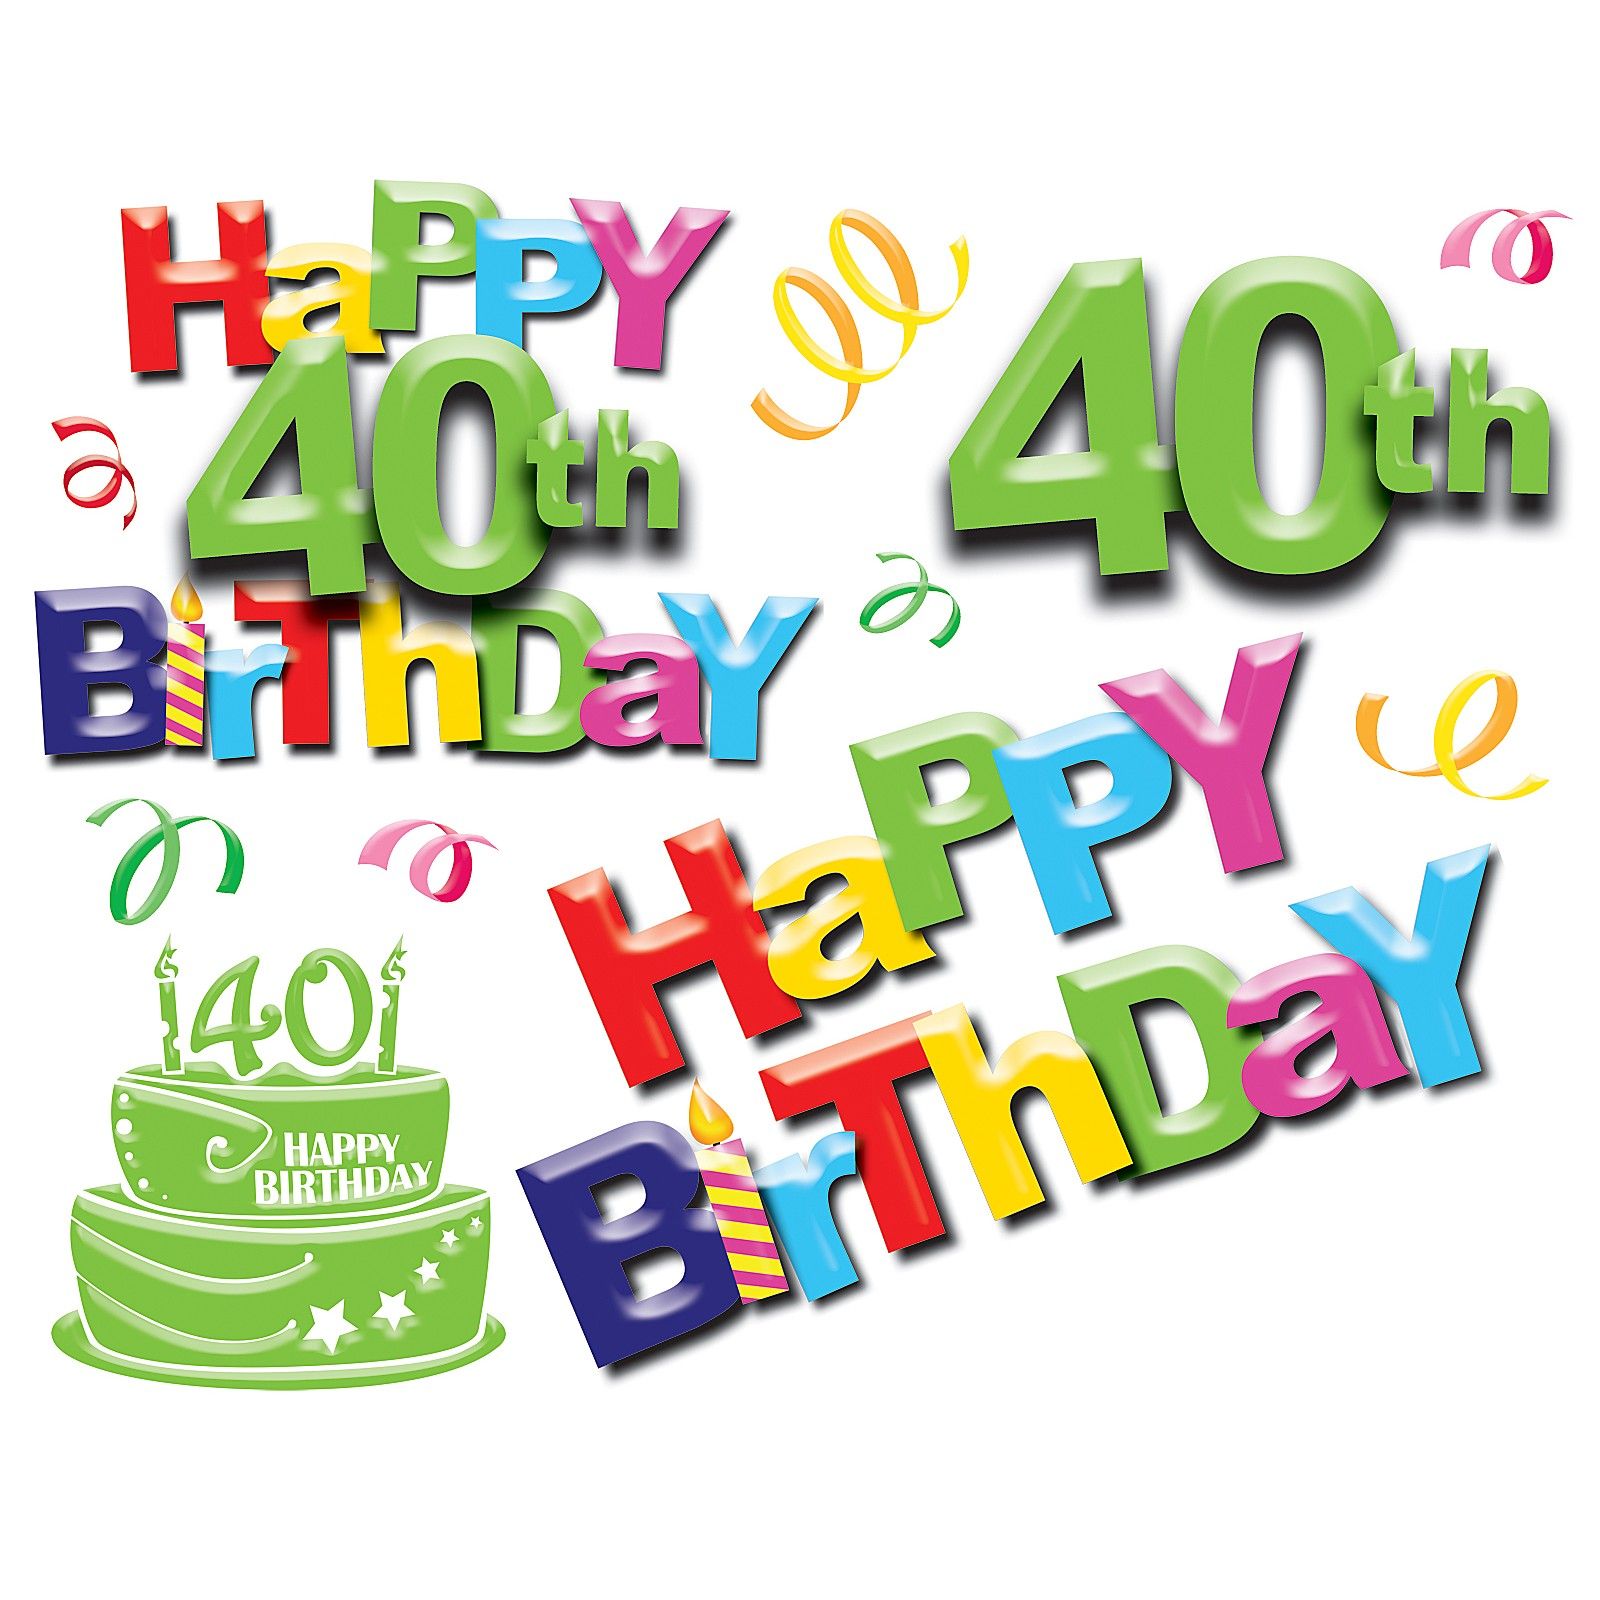 Free Happy 40th Birthday Clipart .clipart Library.com